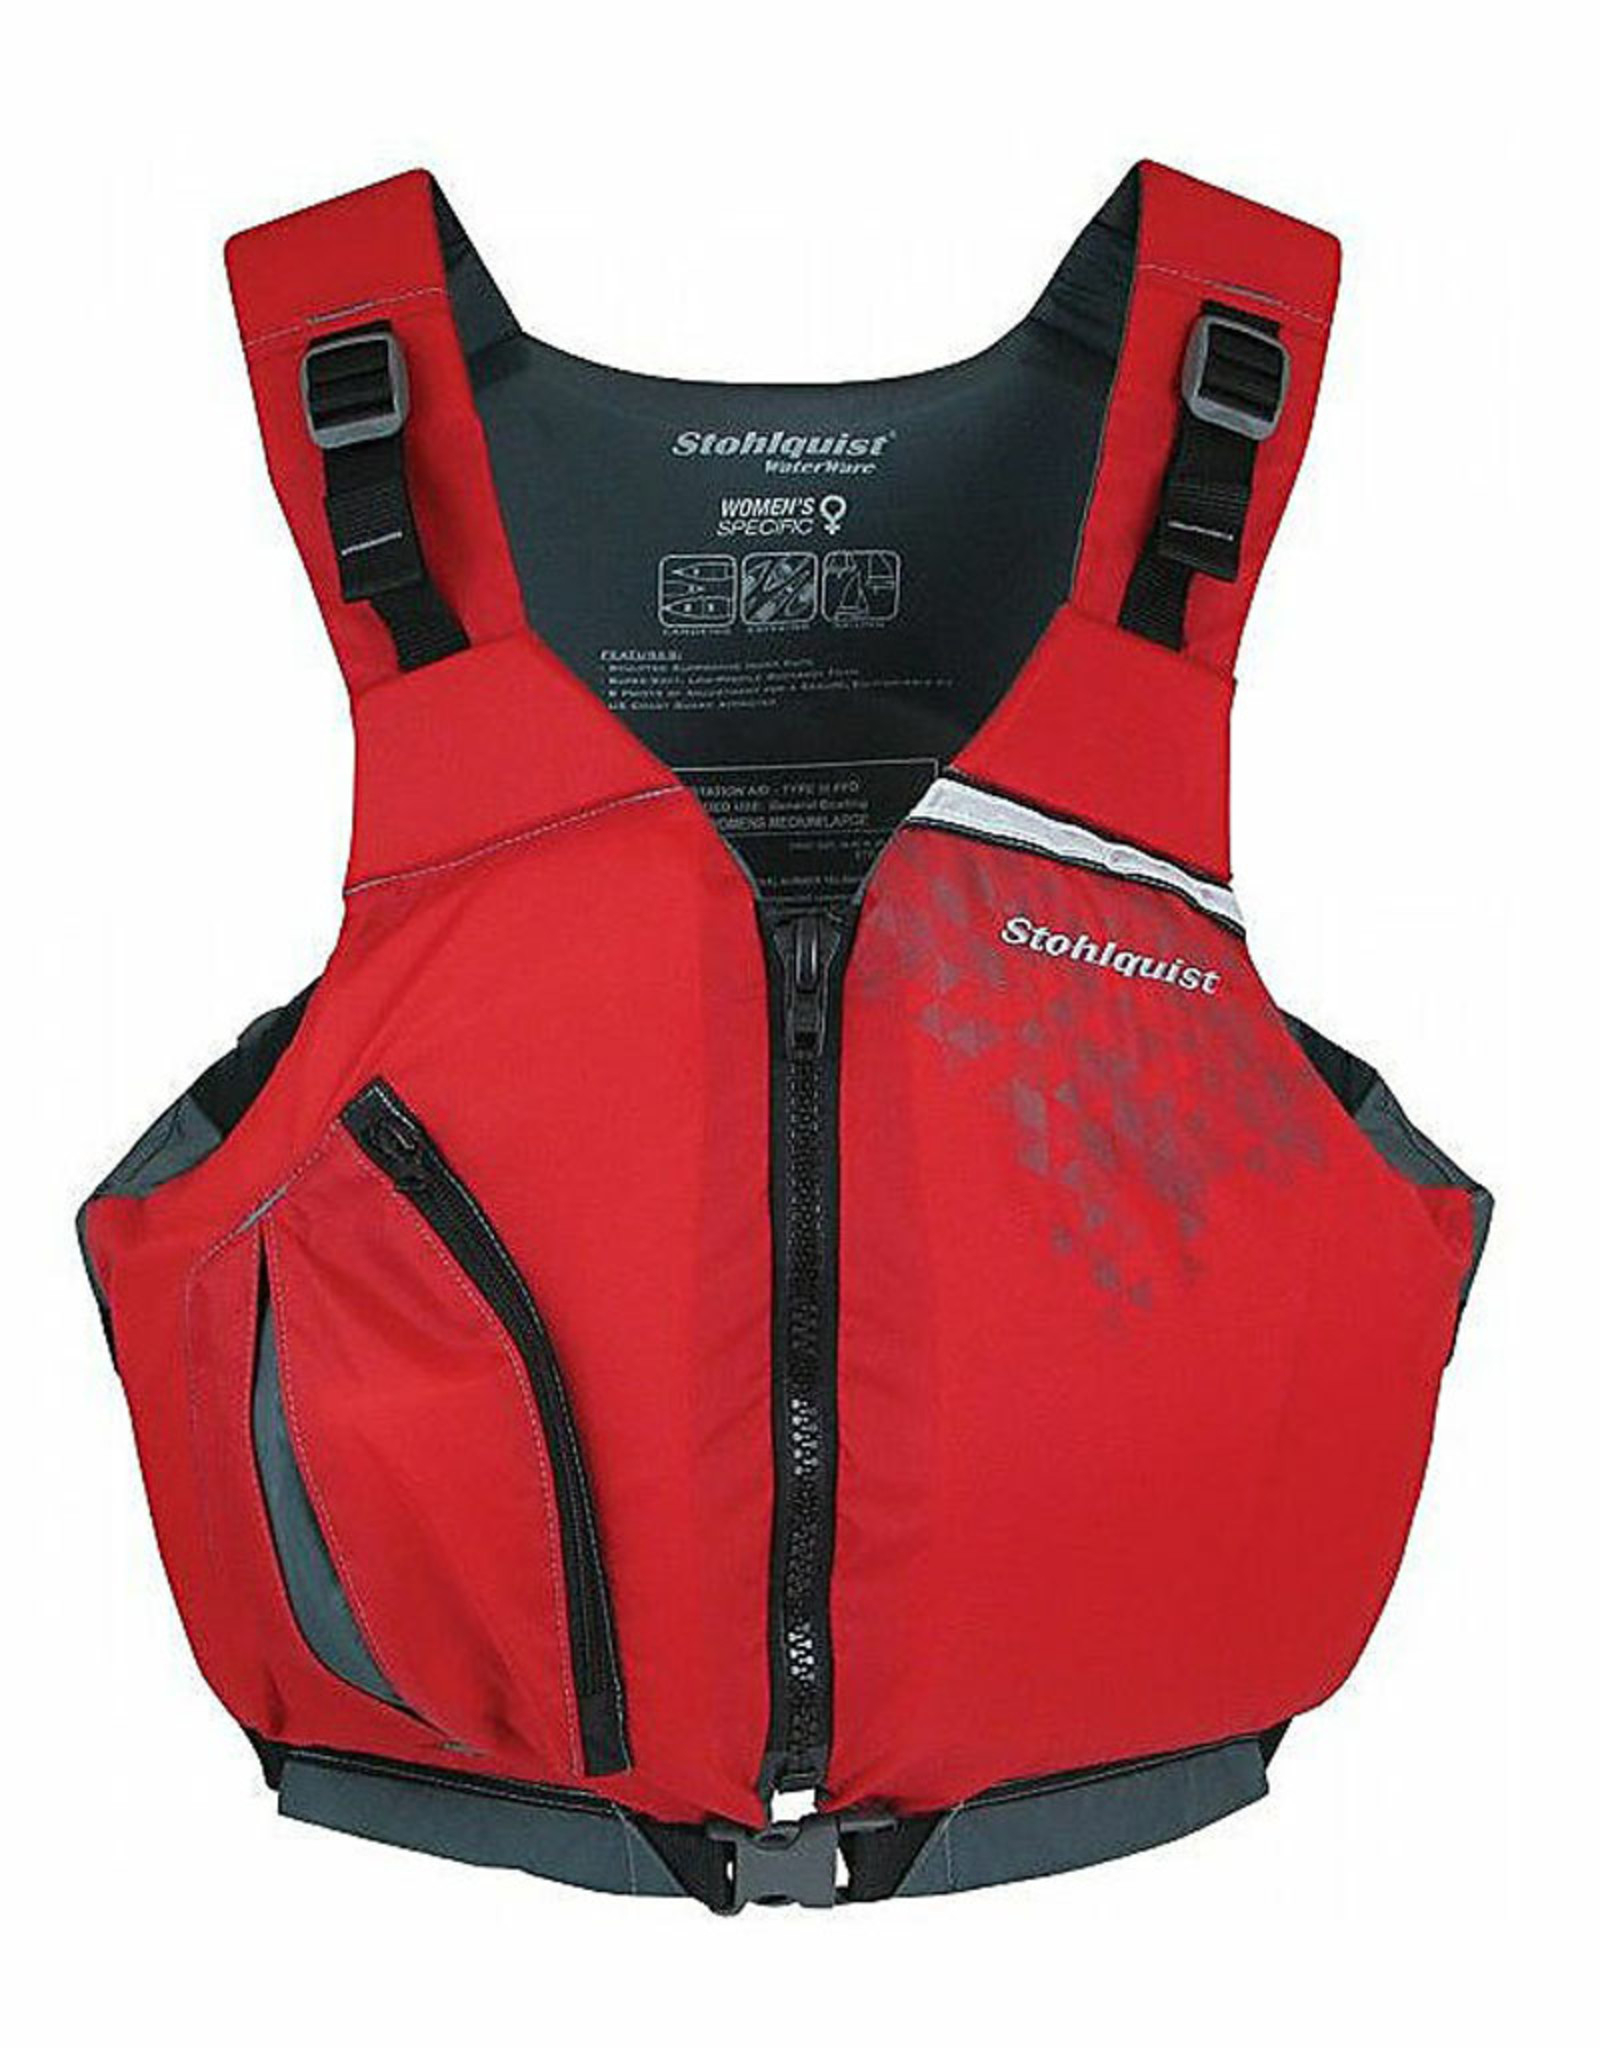 Stohlquist Stohlquist Escape Life Jacket Adult -Discontinued